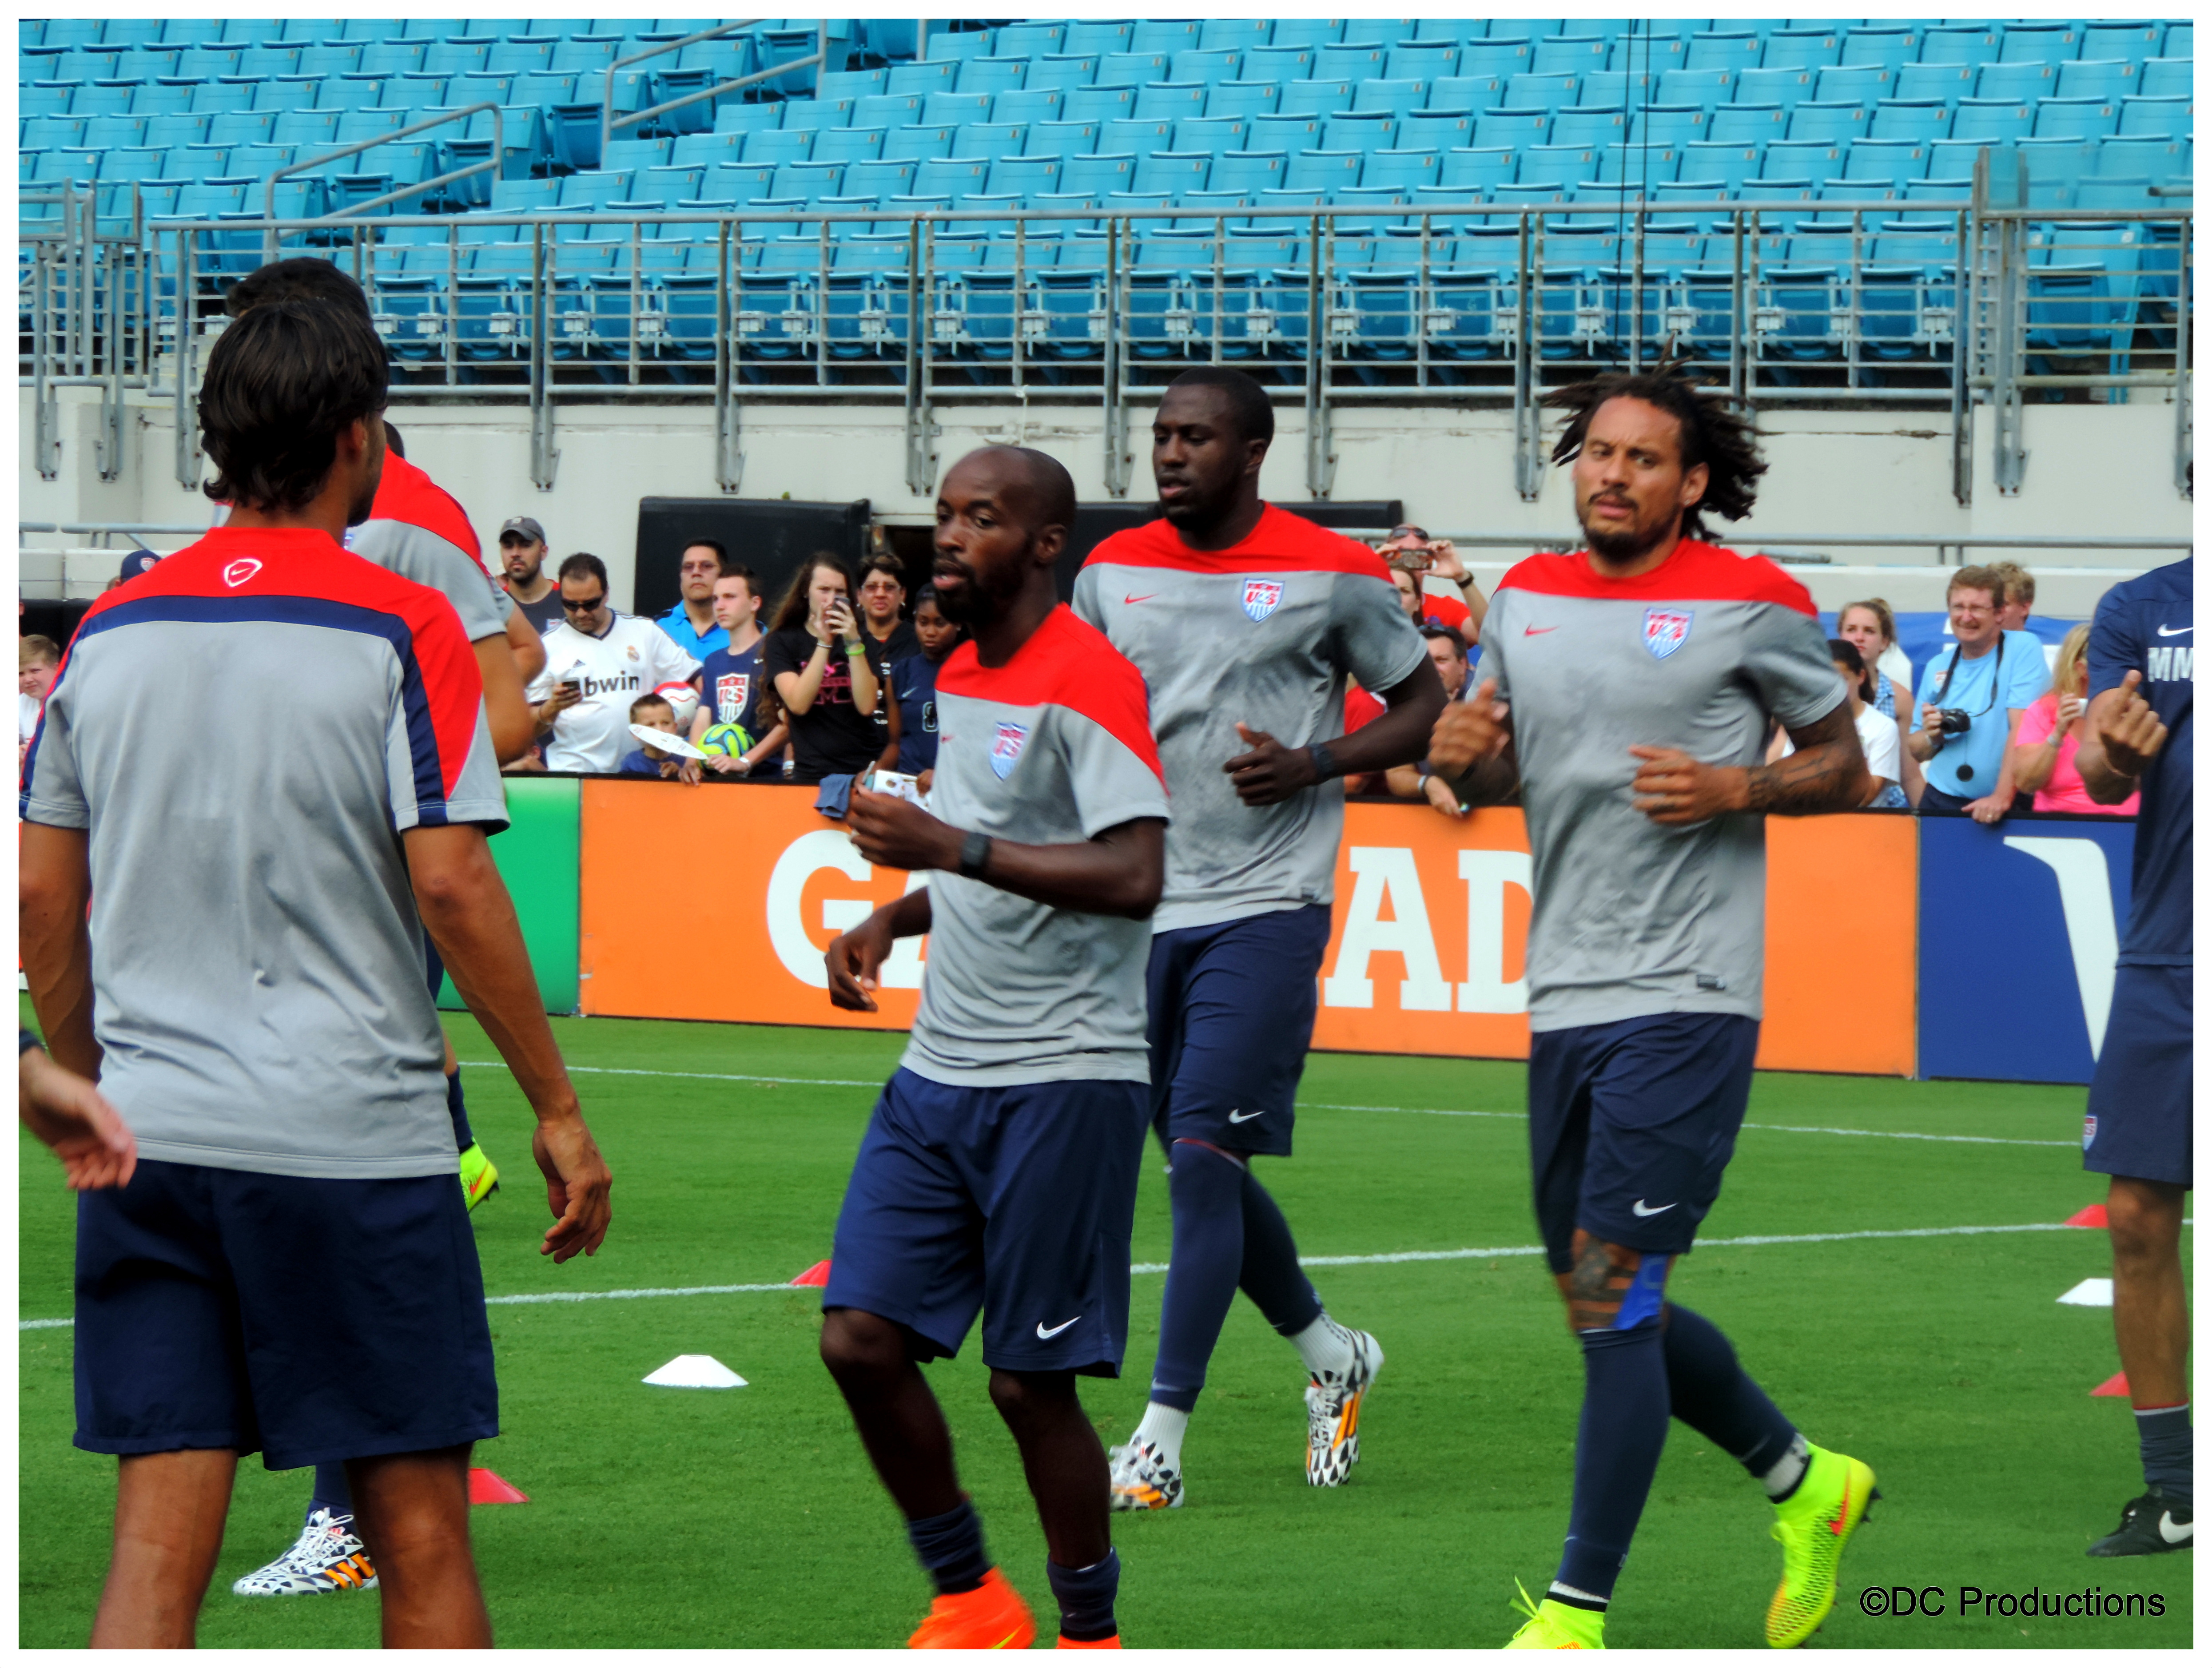 U.S Men National Soccer Team Prepares for the World Cup